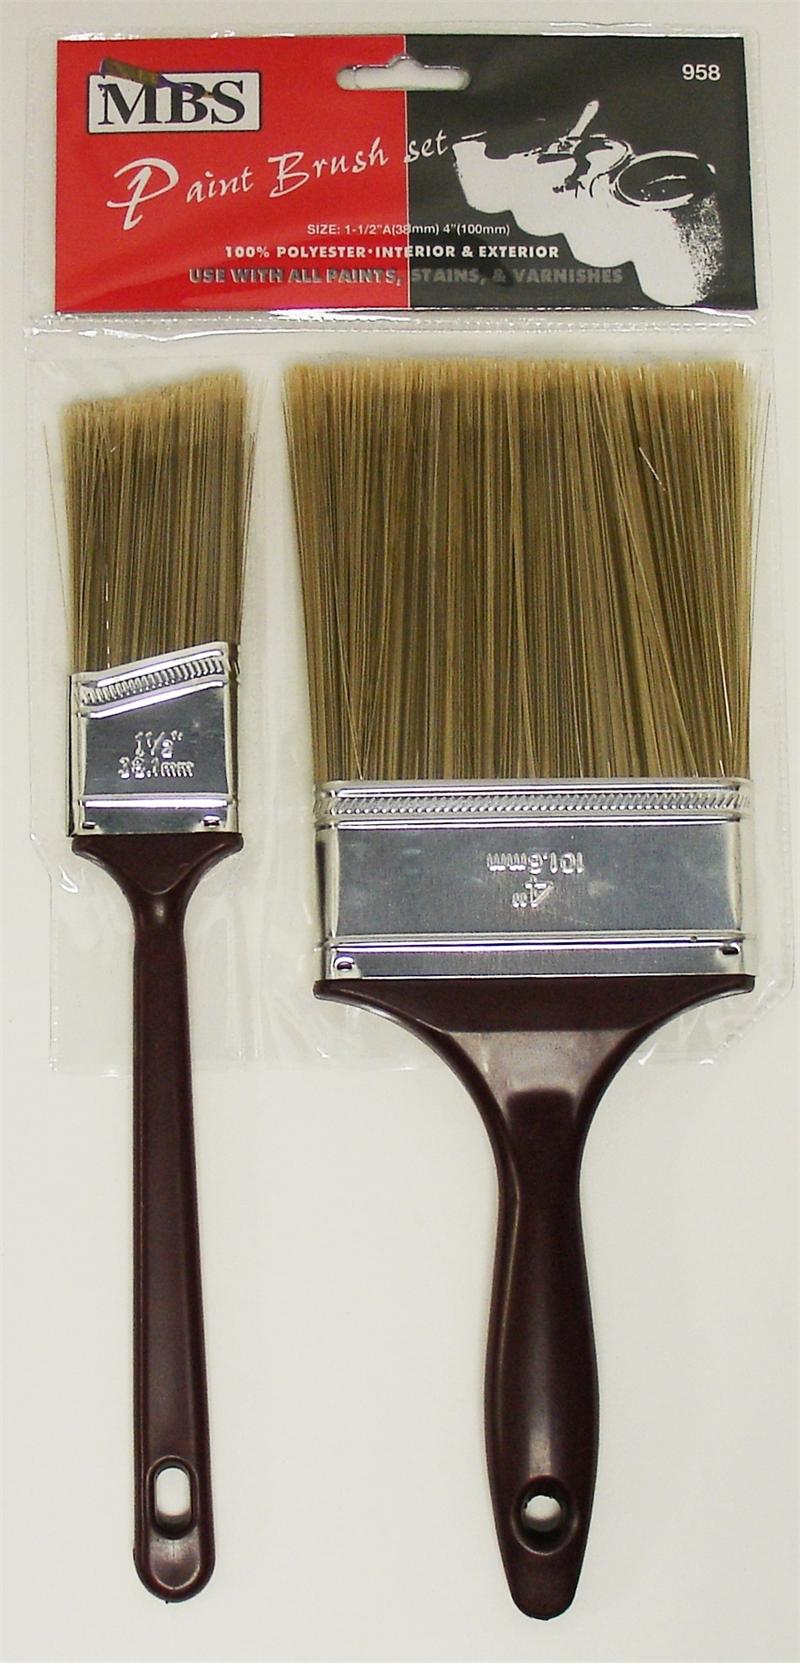 2-Piece PAINT Brush (1-1/2 ANGLE & 4) -100% POLYESTER-